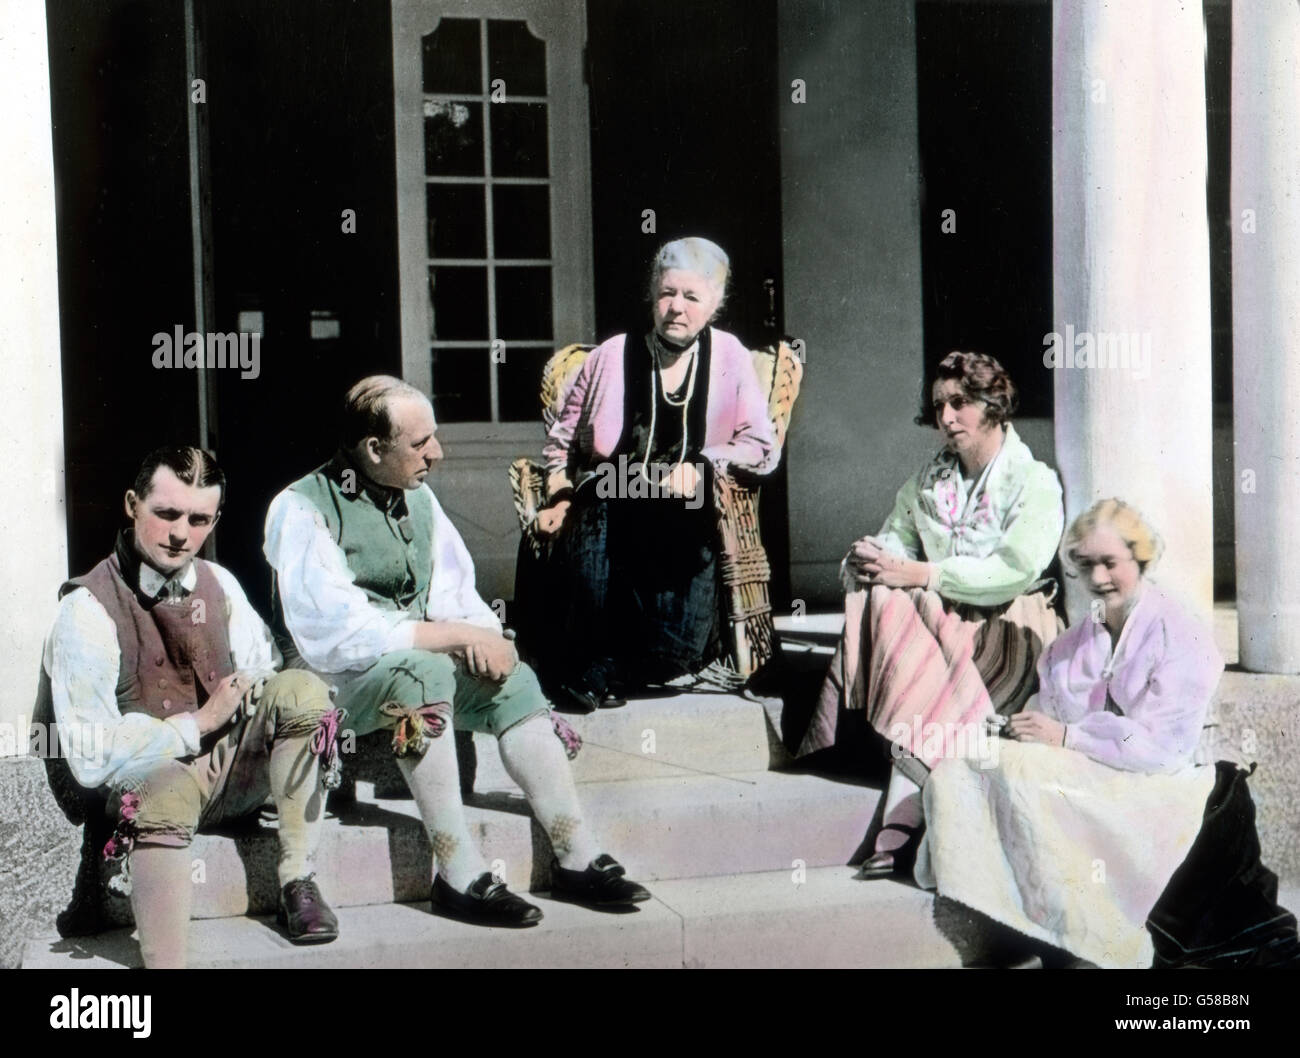 Die schwedische Schrifstellerin Selma Lagerlöf vor ihrem Haus. Europe, Sweden, Sverige, Scandinavia, travel, Selma Lagerlöf (center), famous Swedish writer with family  in front of her house, 1910s, 1920s, 20th century, archive, Carl Simon, history, historical, hand coloured glass slide, woman, family, author, writer, klady, sitting, house, entrance Stock Photo